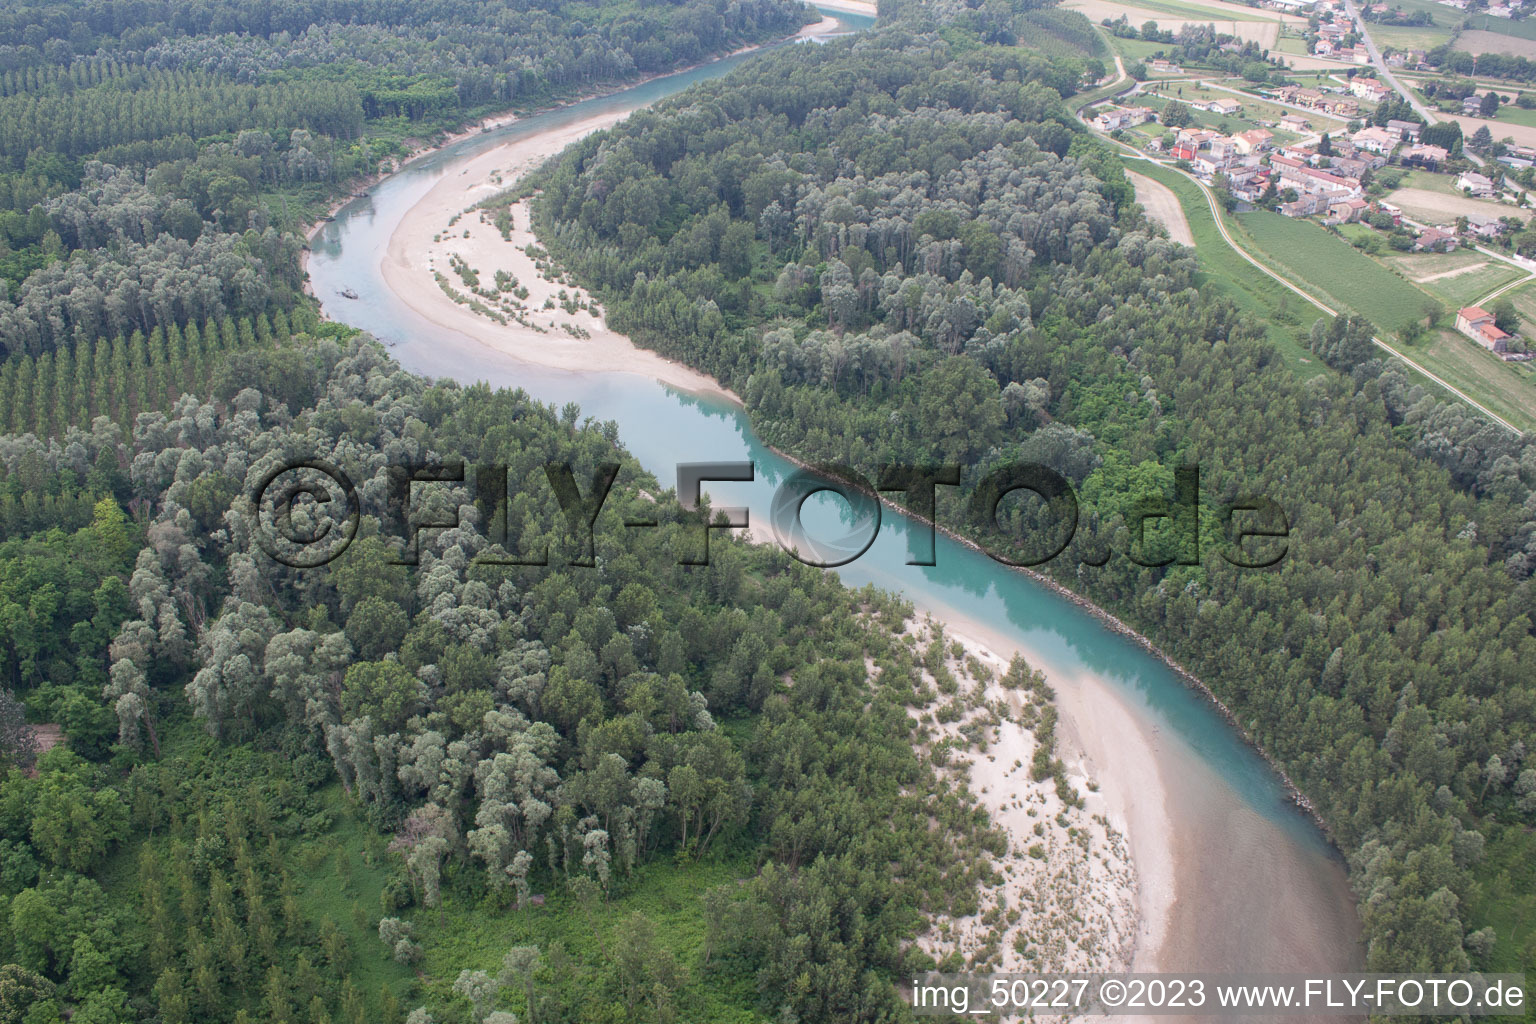 Aerial view of Malafesia in the state Veneto, Italy